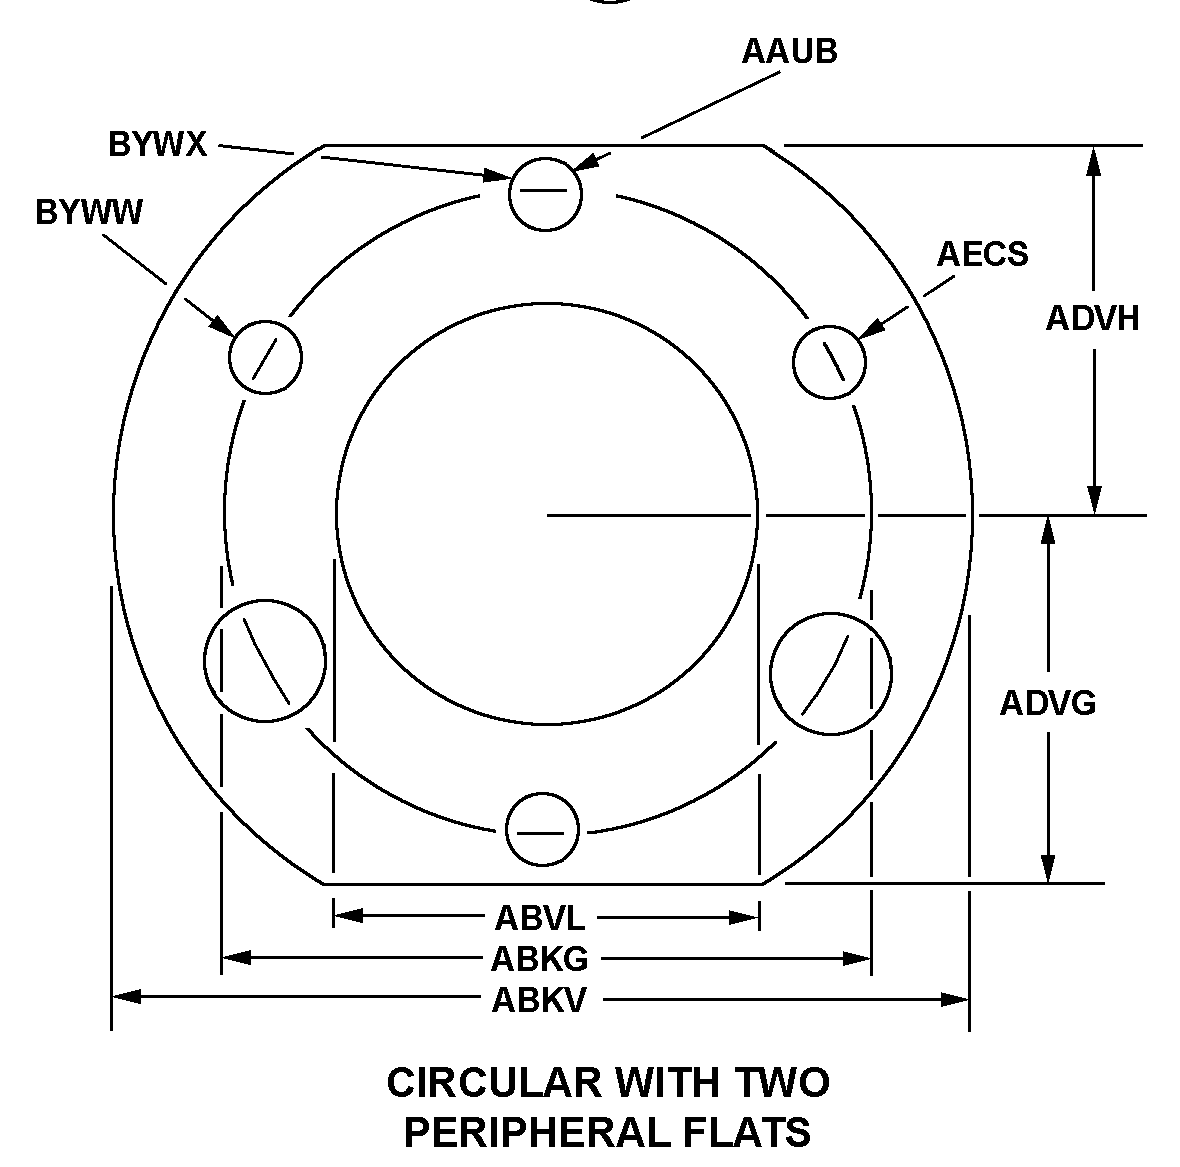 CIRCULAR WITH TWO PERIPHERAL FLATS style nsn 5330-01-468-2644